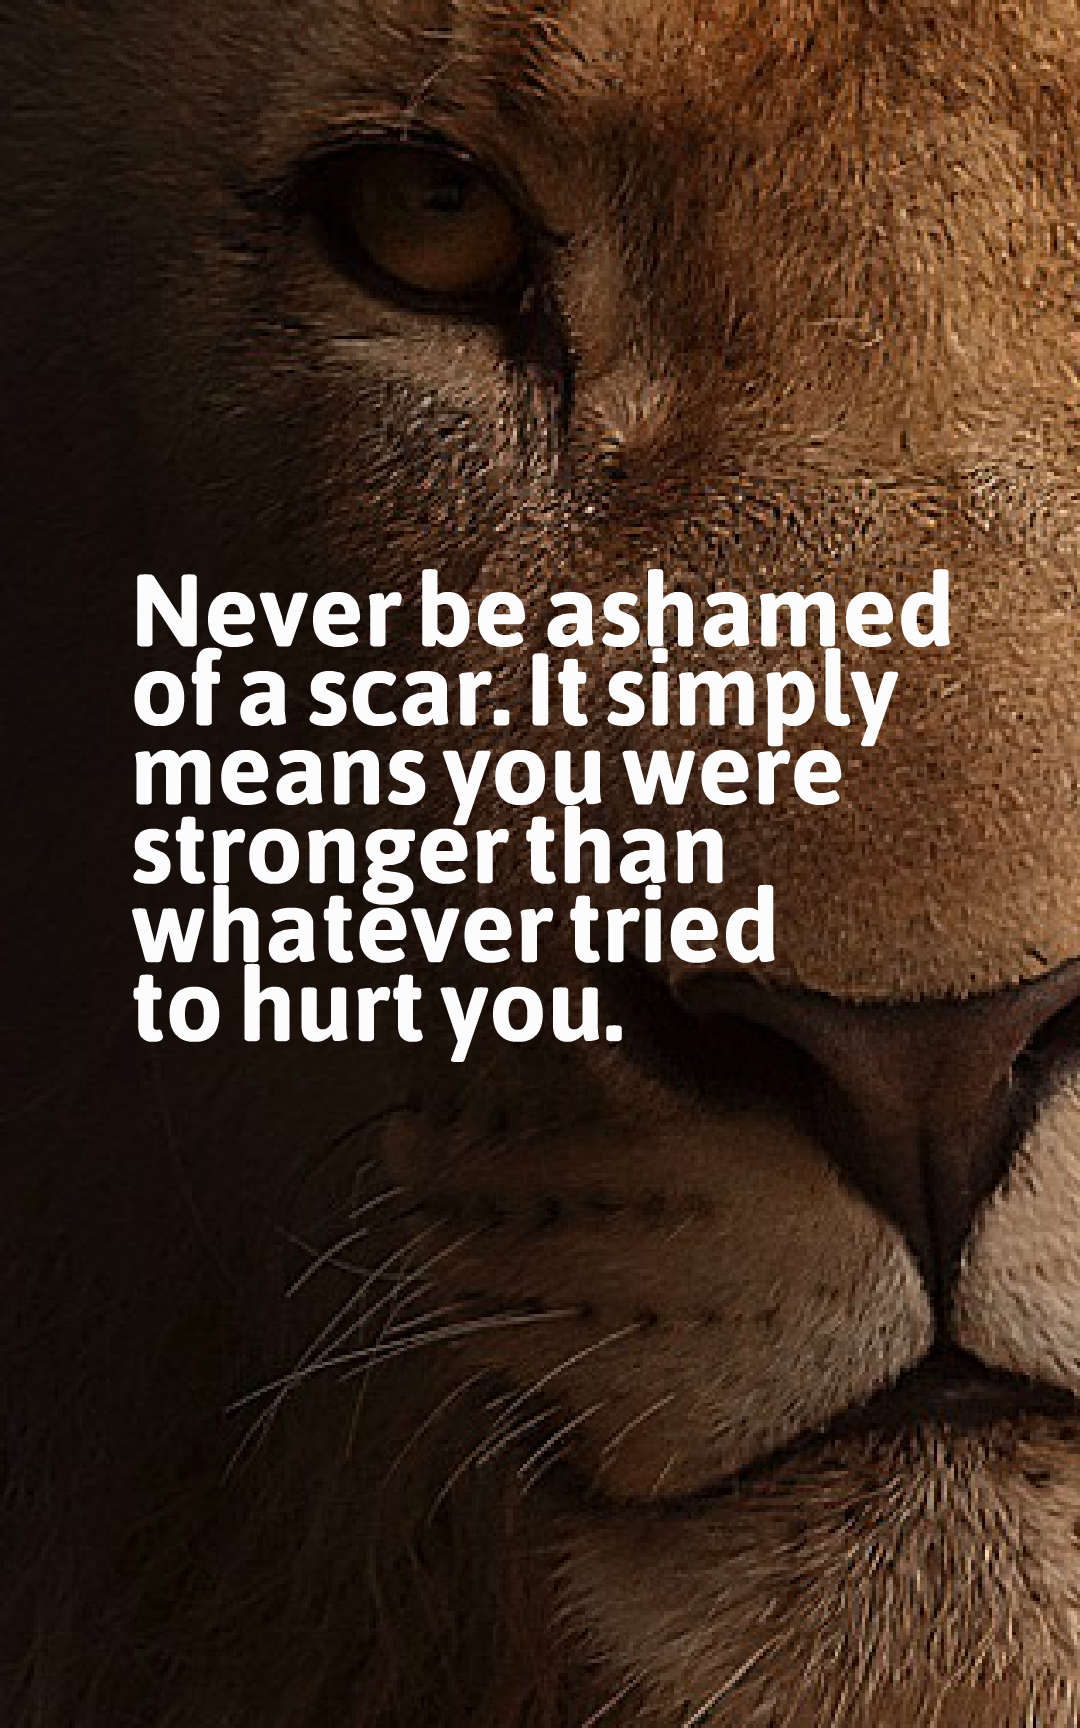 Never be ashamed of a scar. It simply means you were stronger than whatever tried to hurt you.